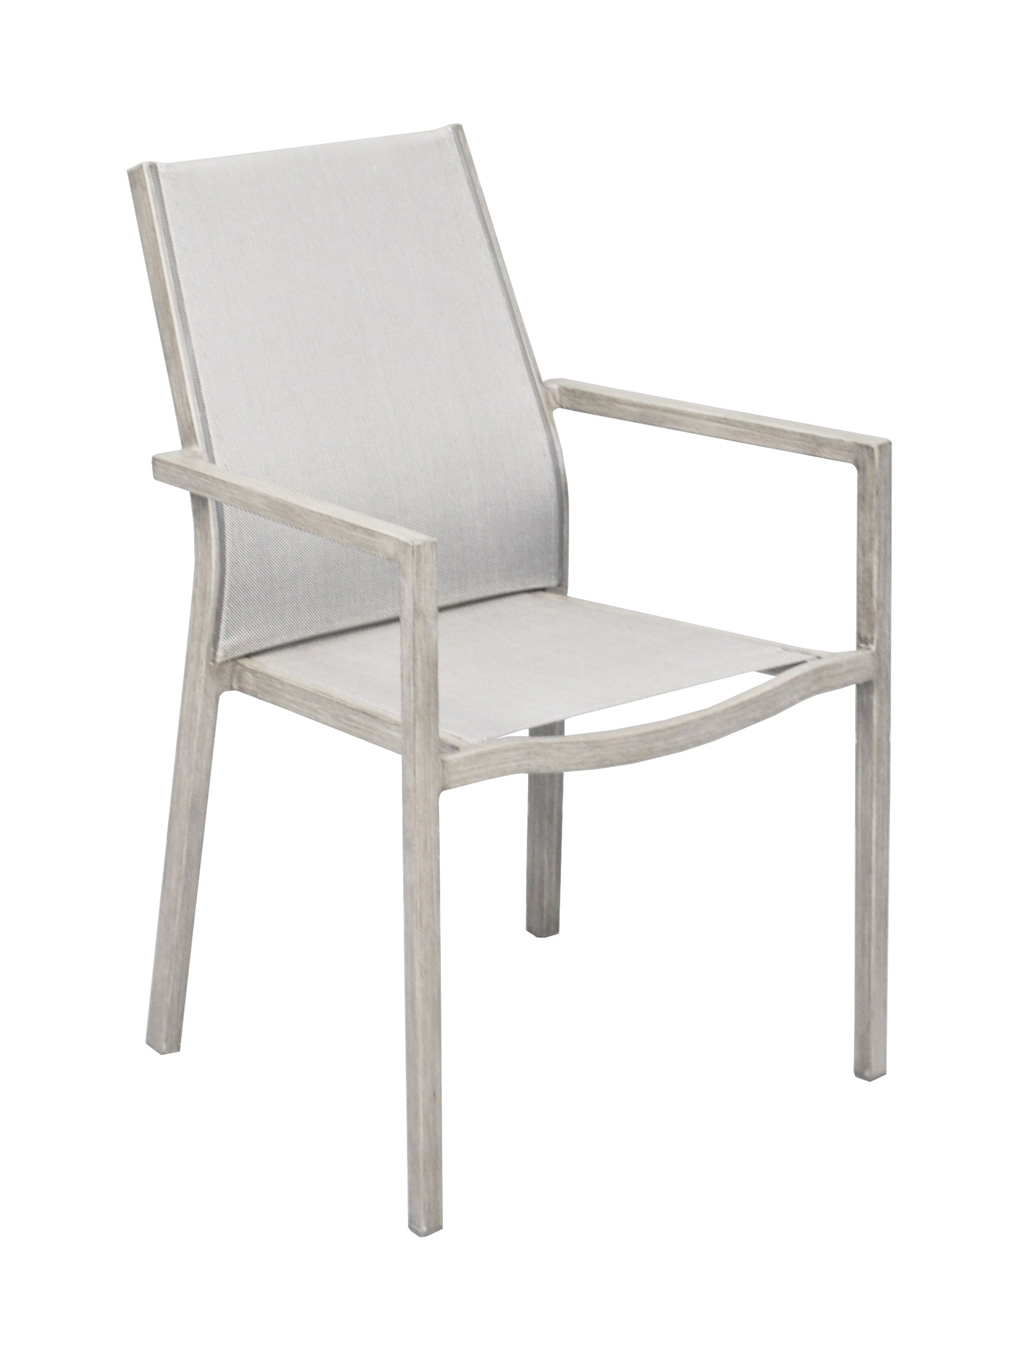 Fauteuil Flore OCEO lin